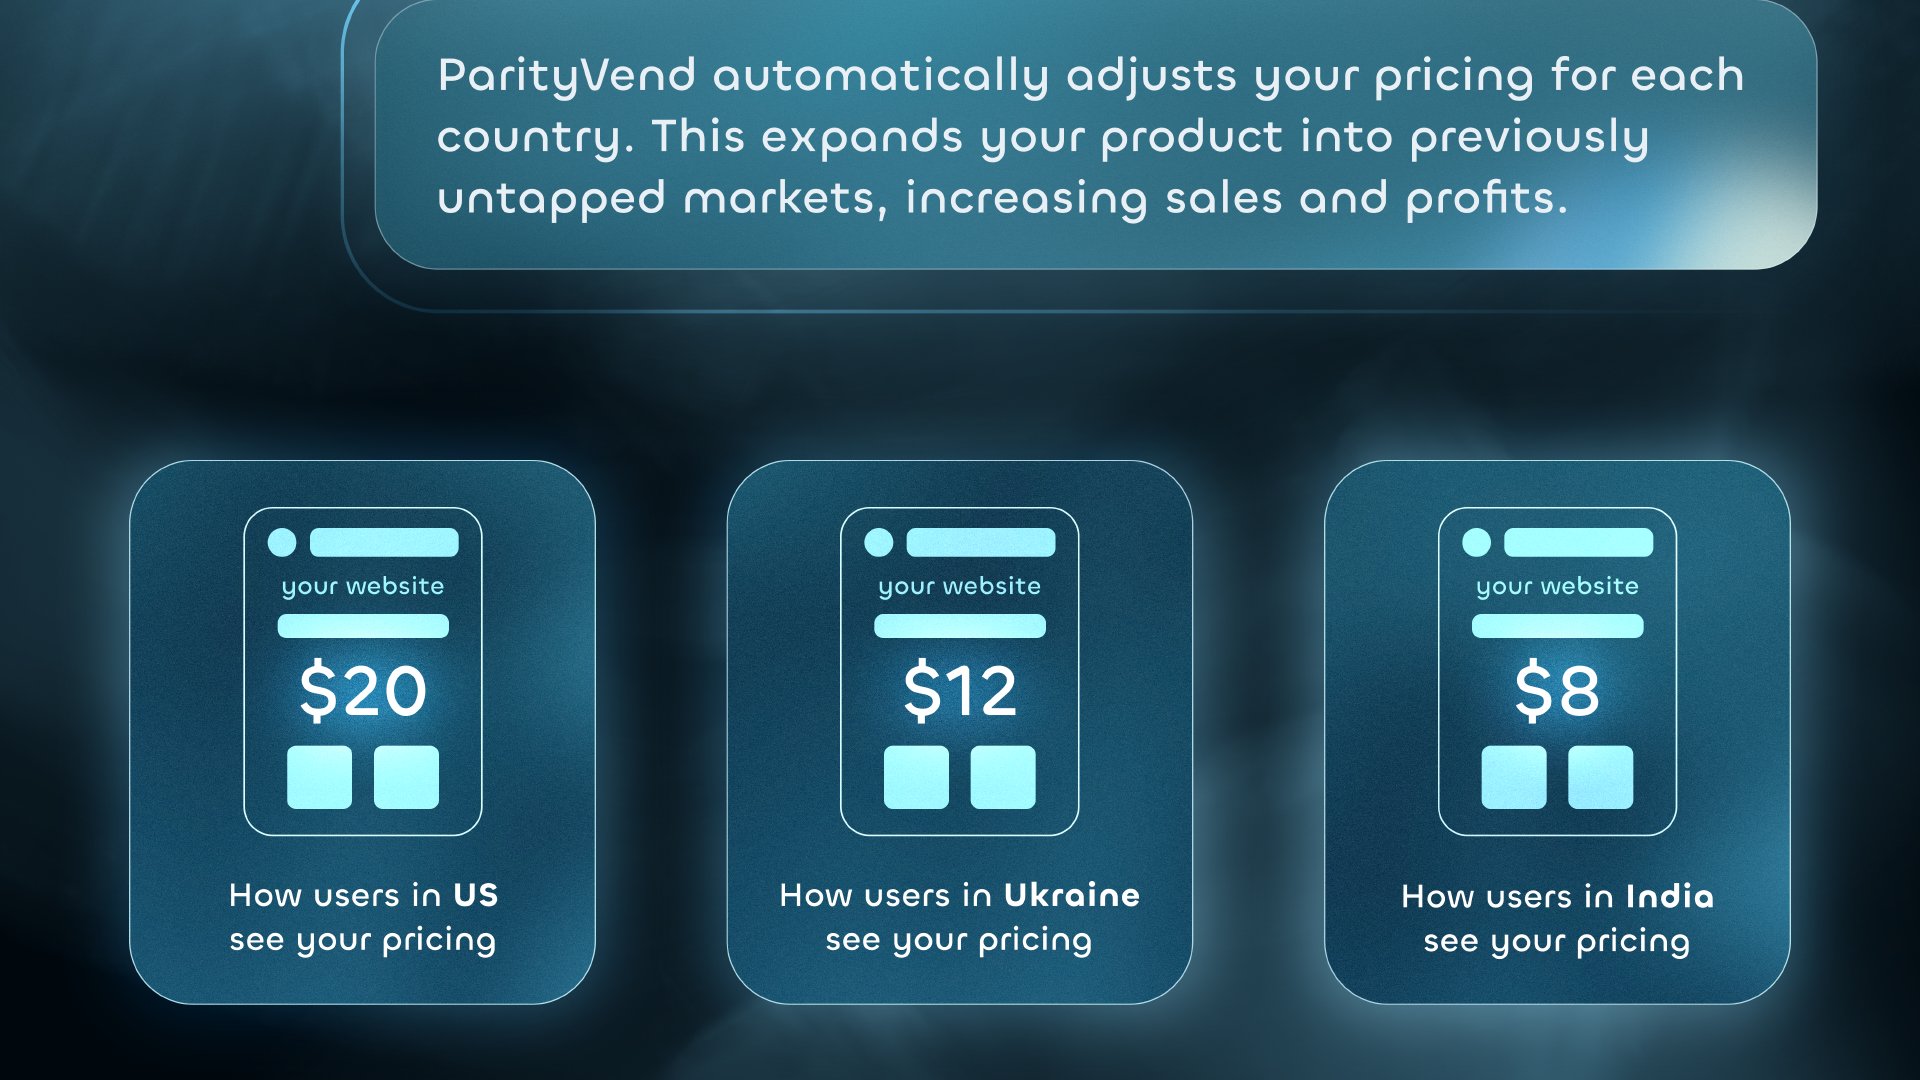 How does it work? ParityVend automatically adjusts your pricing for each country. This expands your product into previously untapped markets, increasing sales and profits. Your website, and how users in each country see it: $20 (US), $12 (Ukraine), $8 (India).